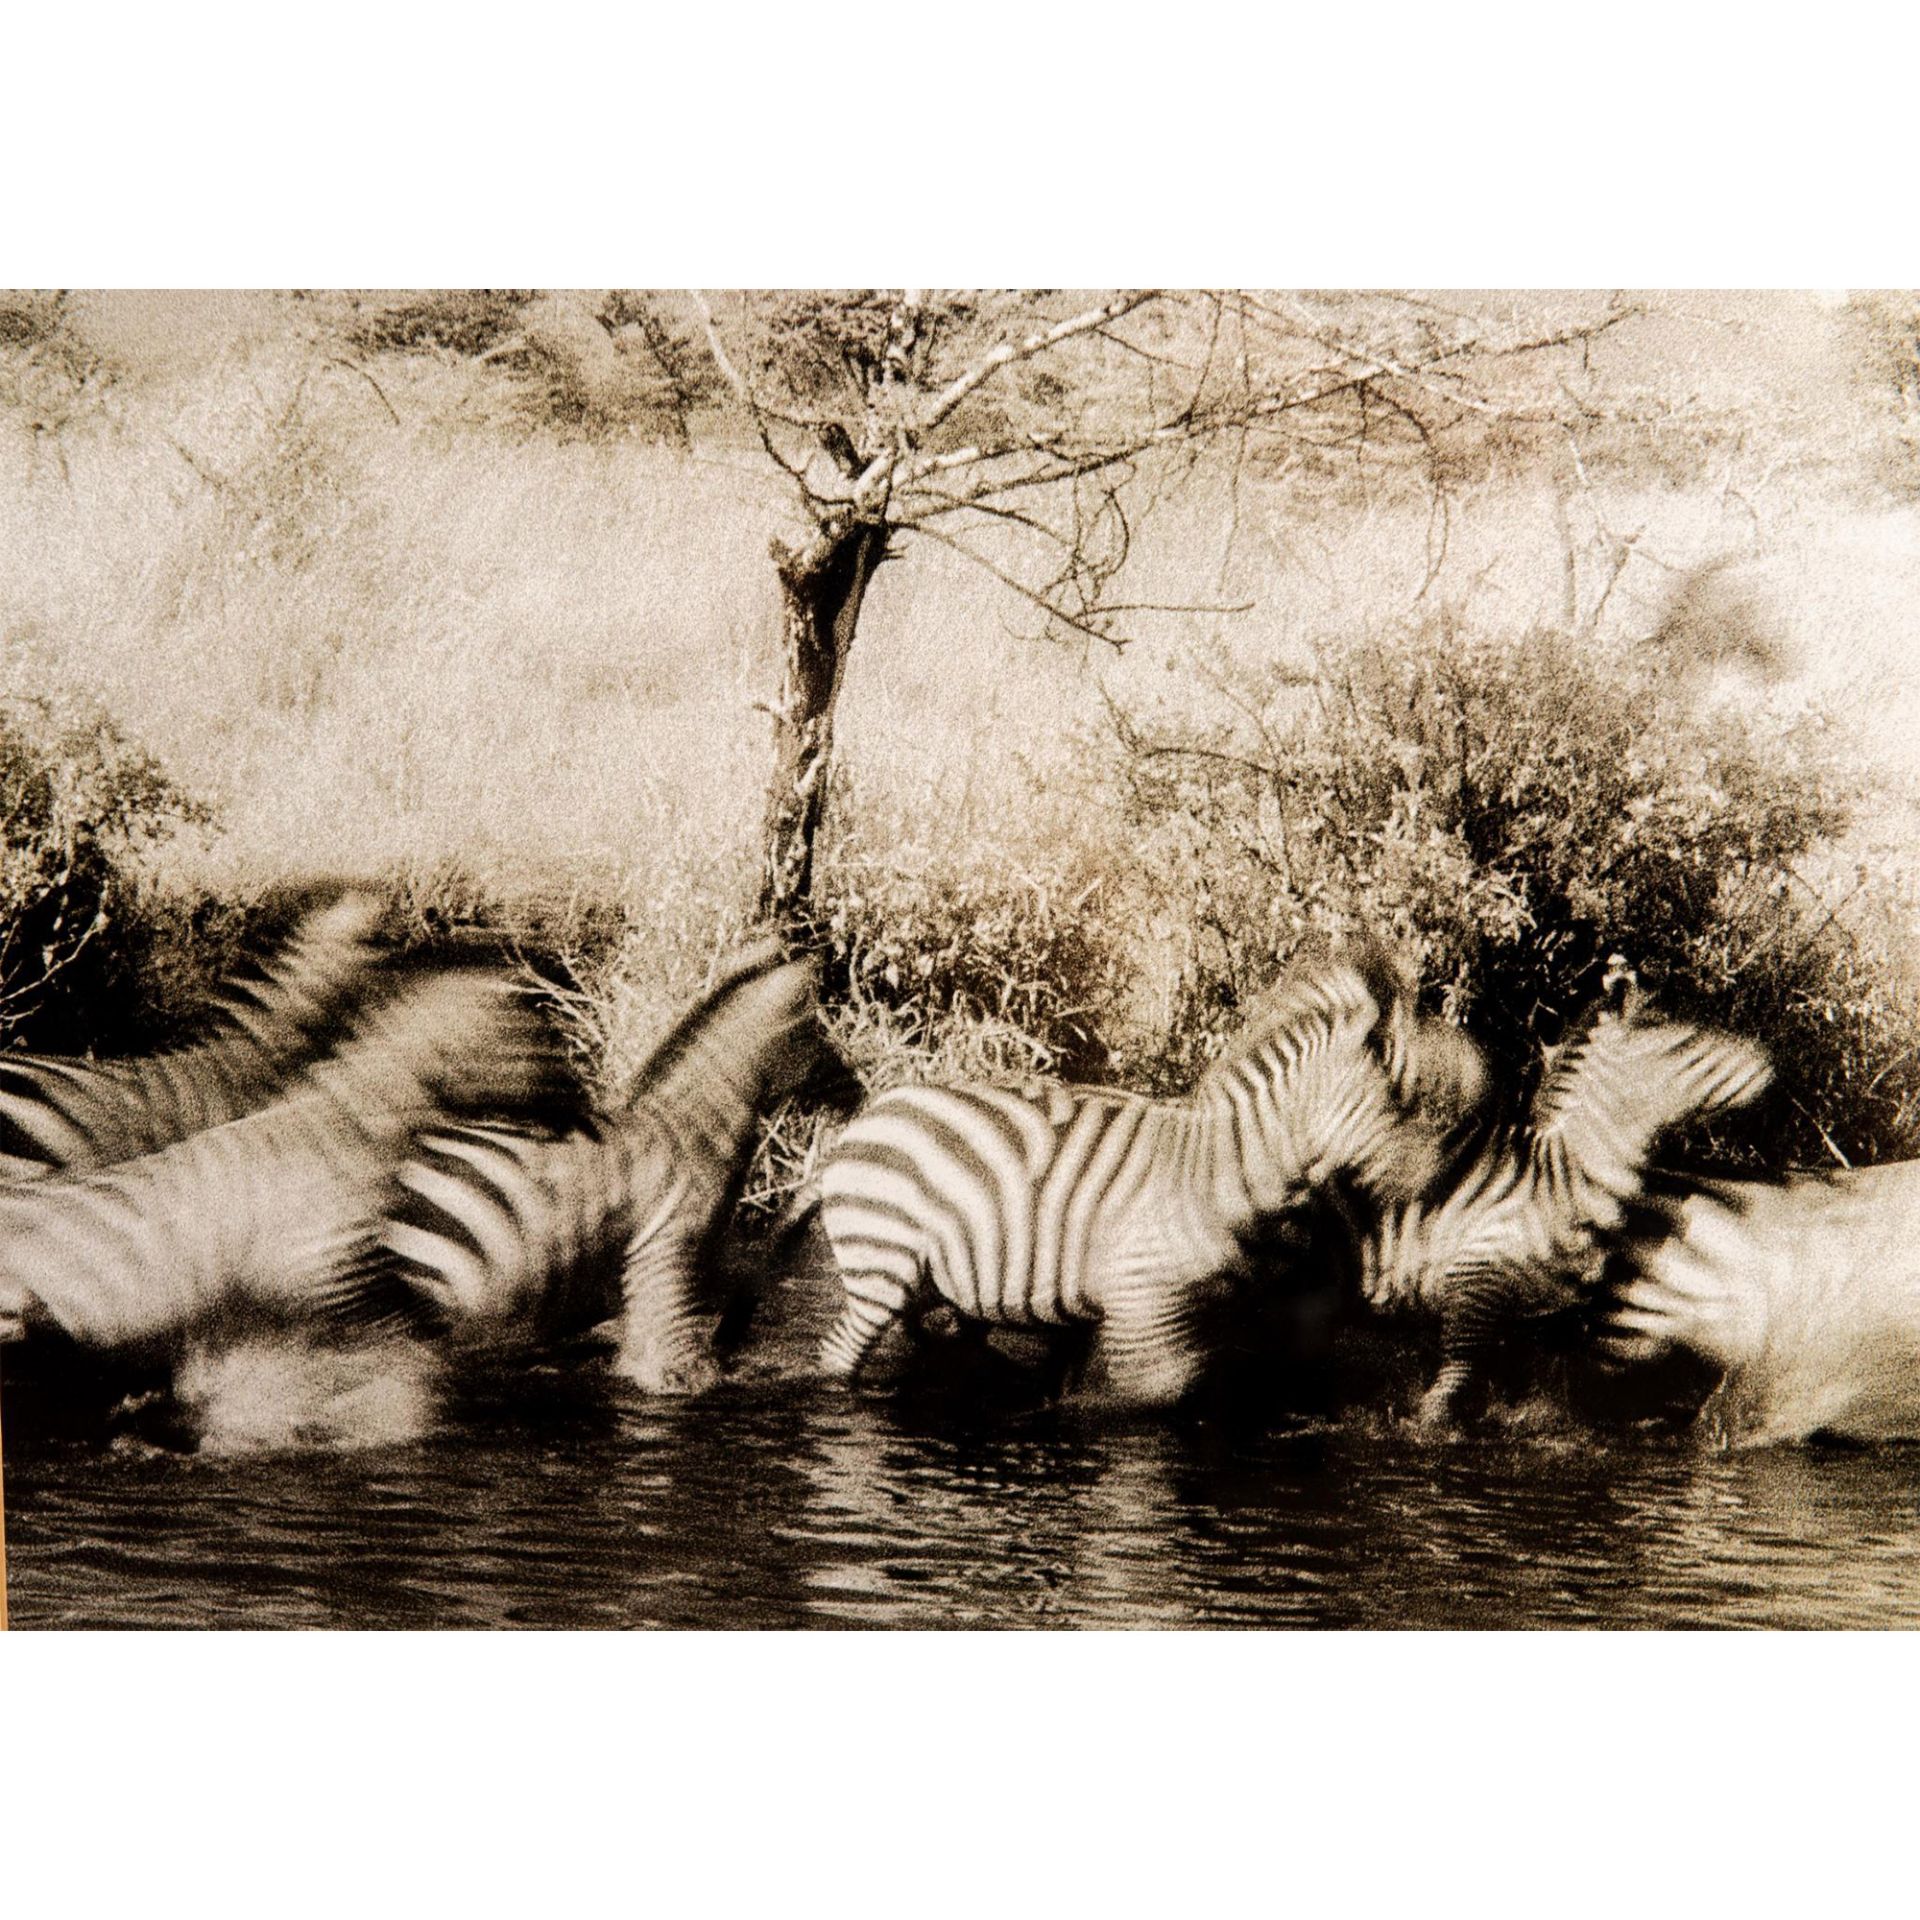 Lorne Resnick, Black & White Photographic Wall Art Print - Image 5 of 6